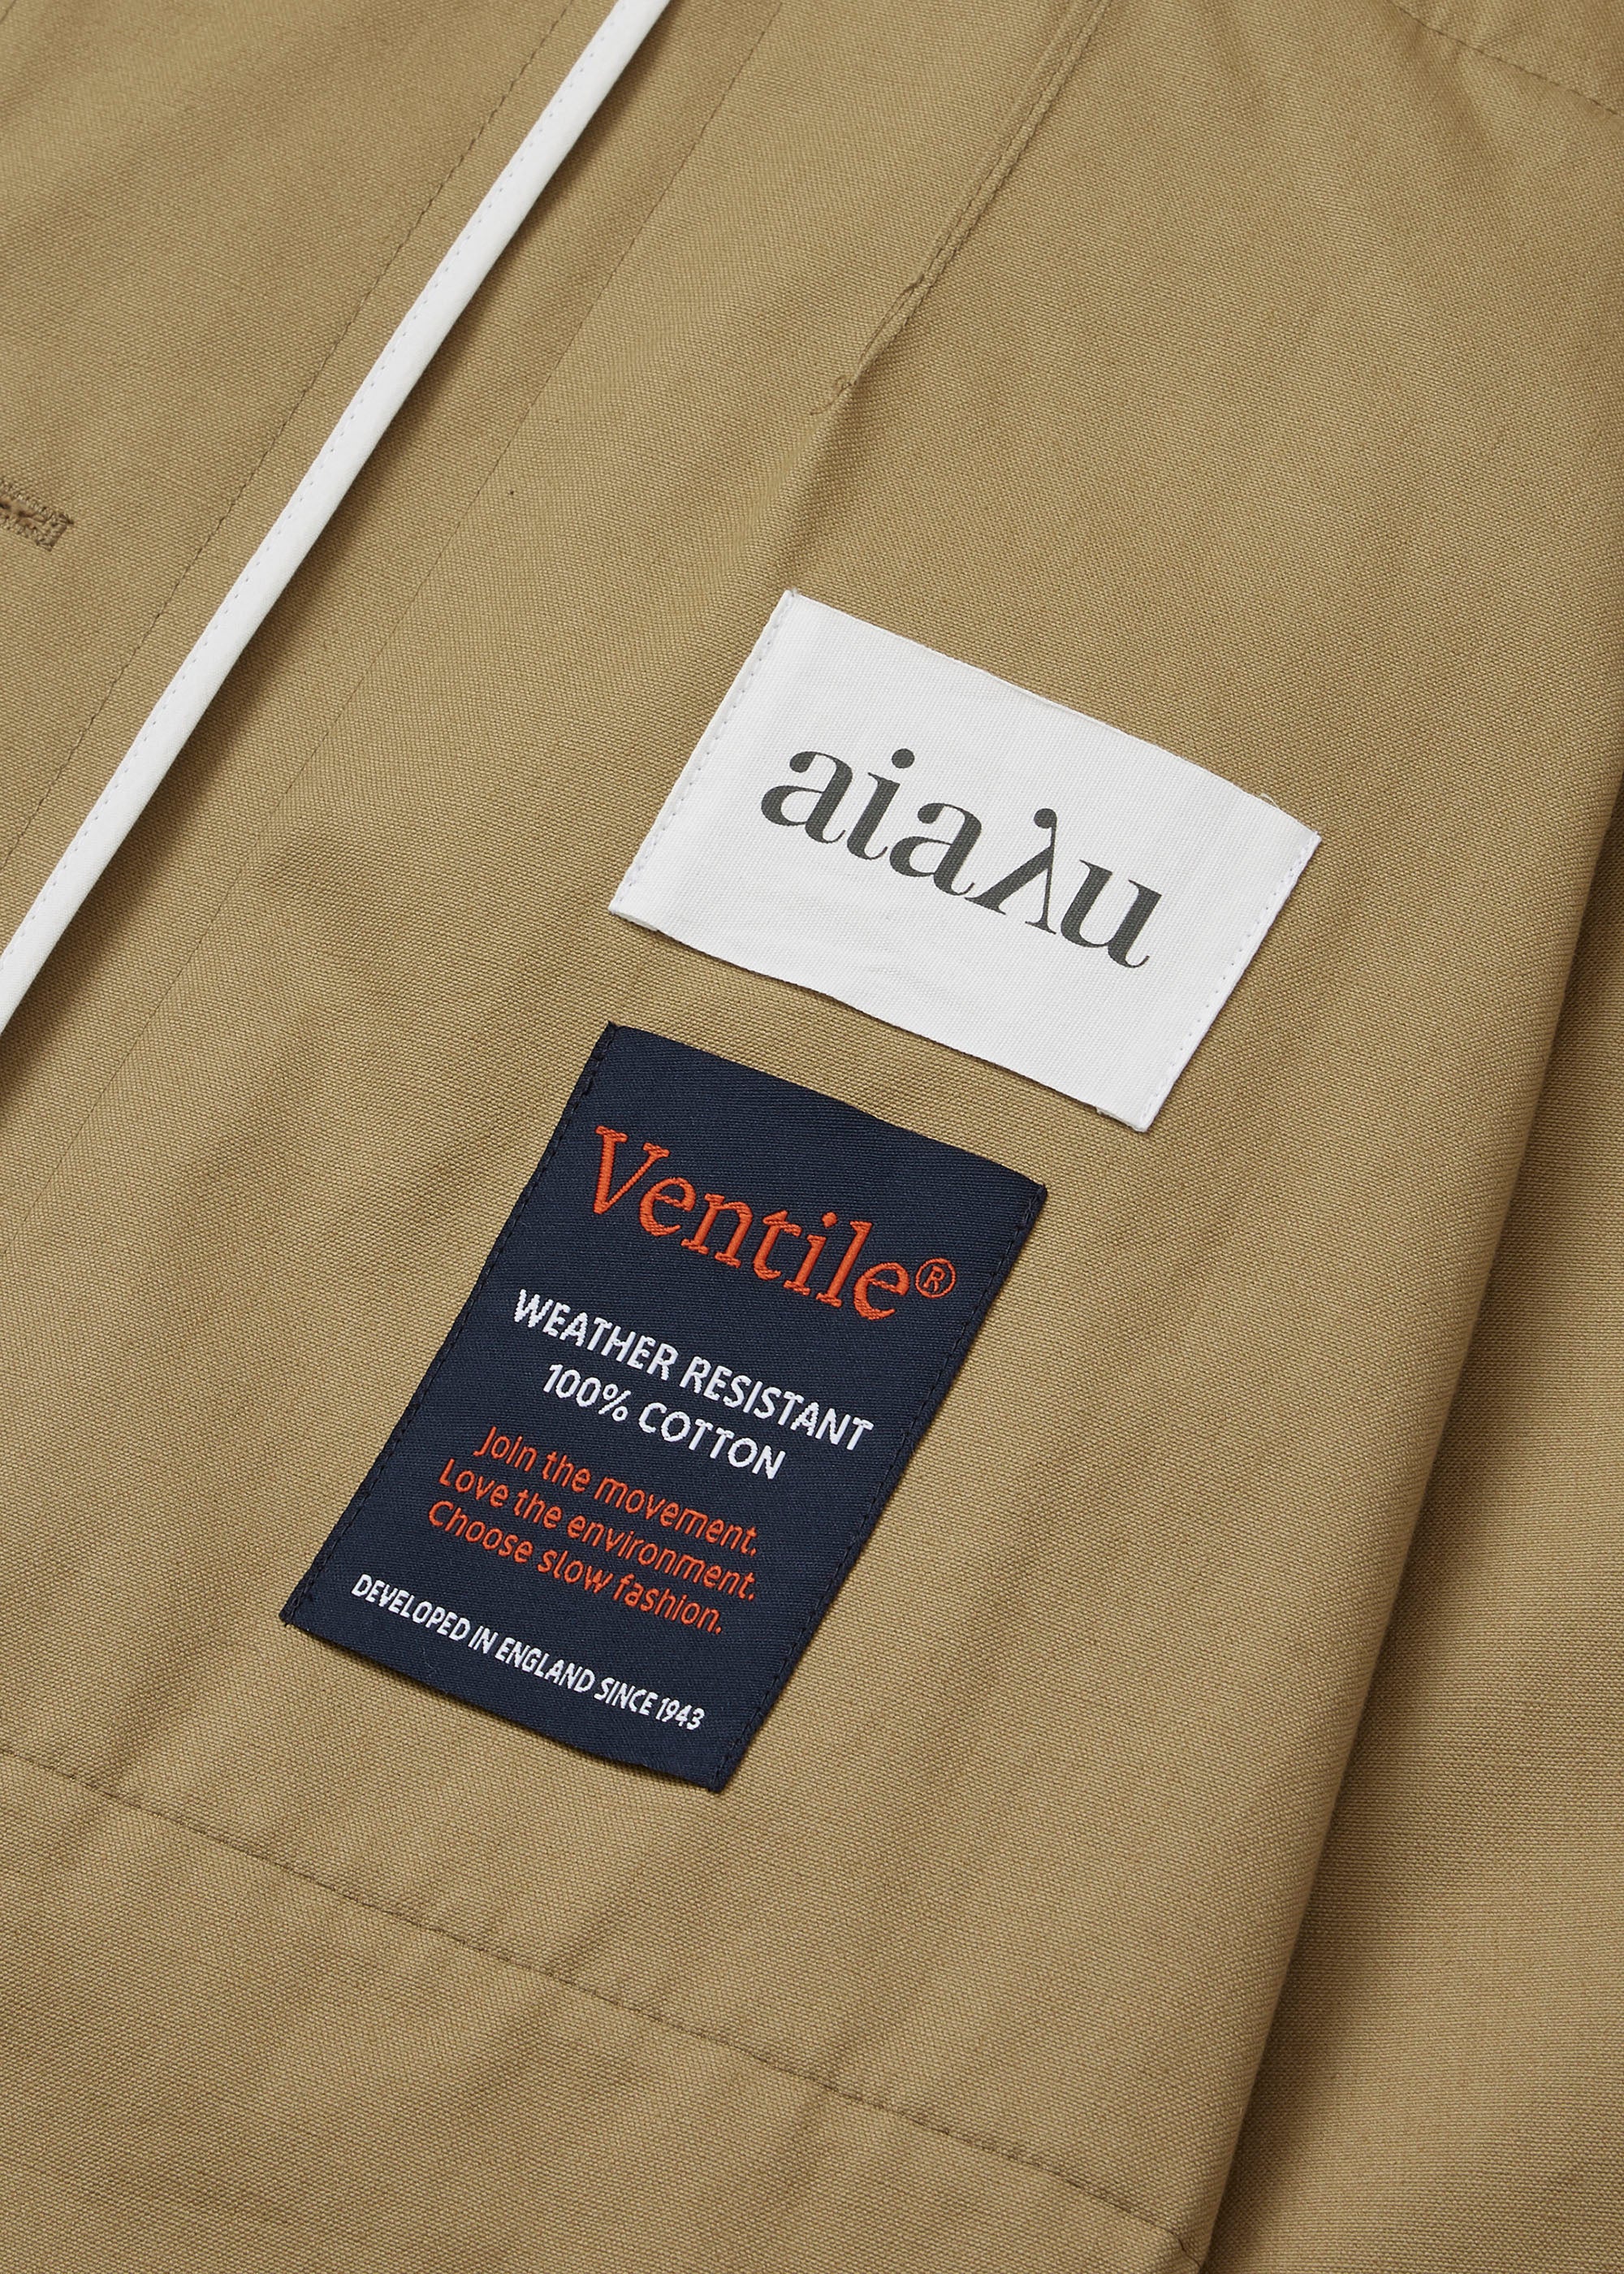 Ventile is a registered trademark of outerwear textile that is naturally waterproof through construction.